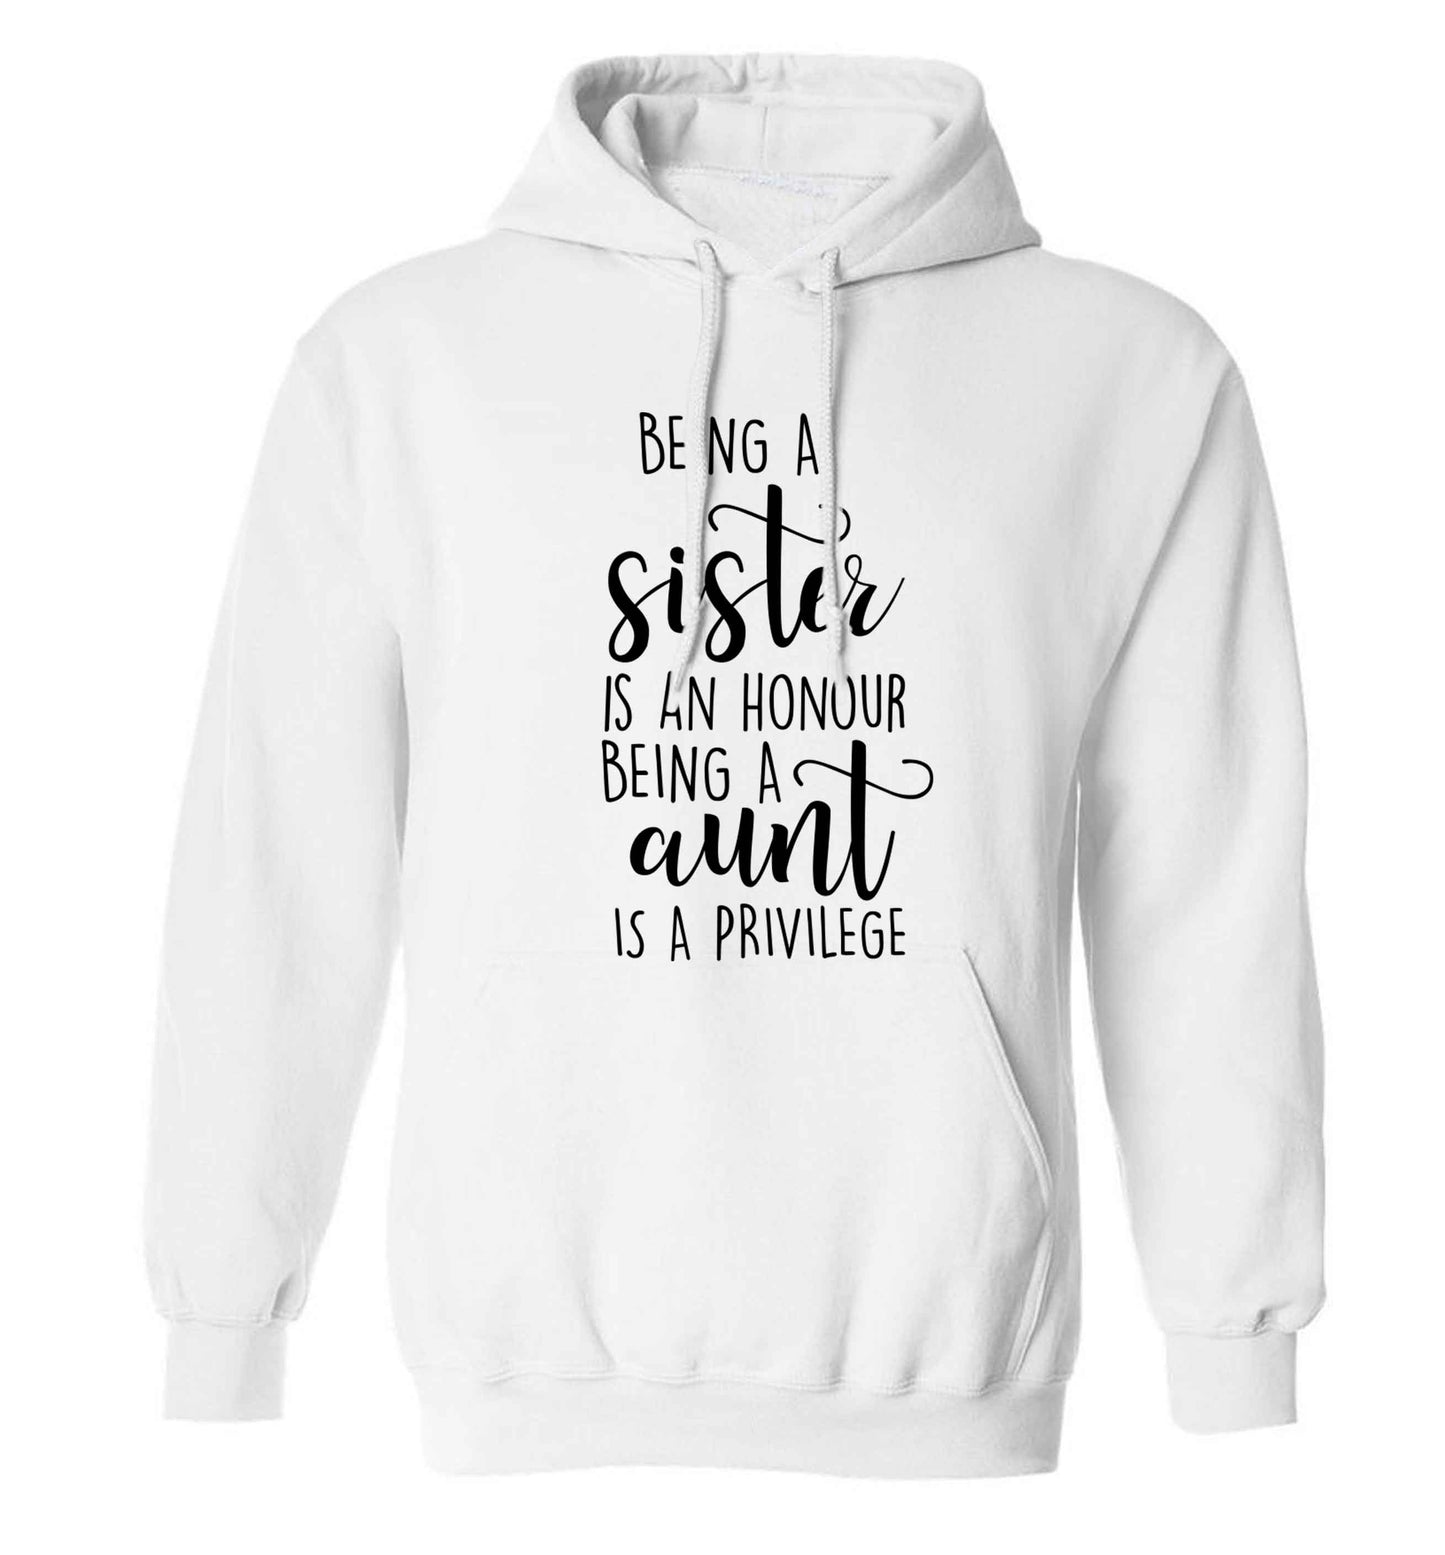 Being a sister is an honour being an auntie is a privilege adults unisex white hoodie 2XL